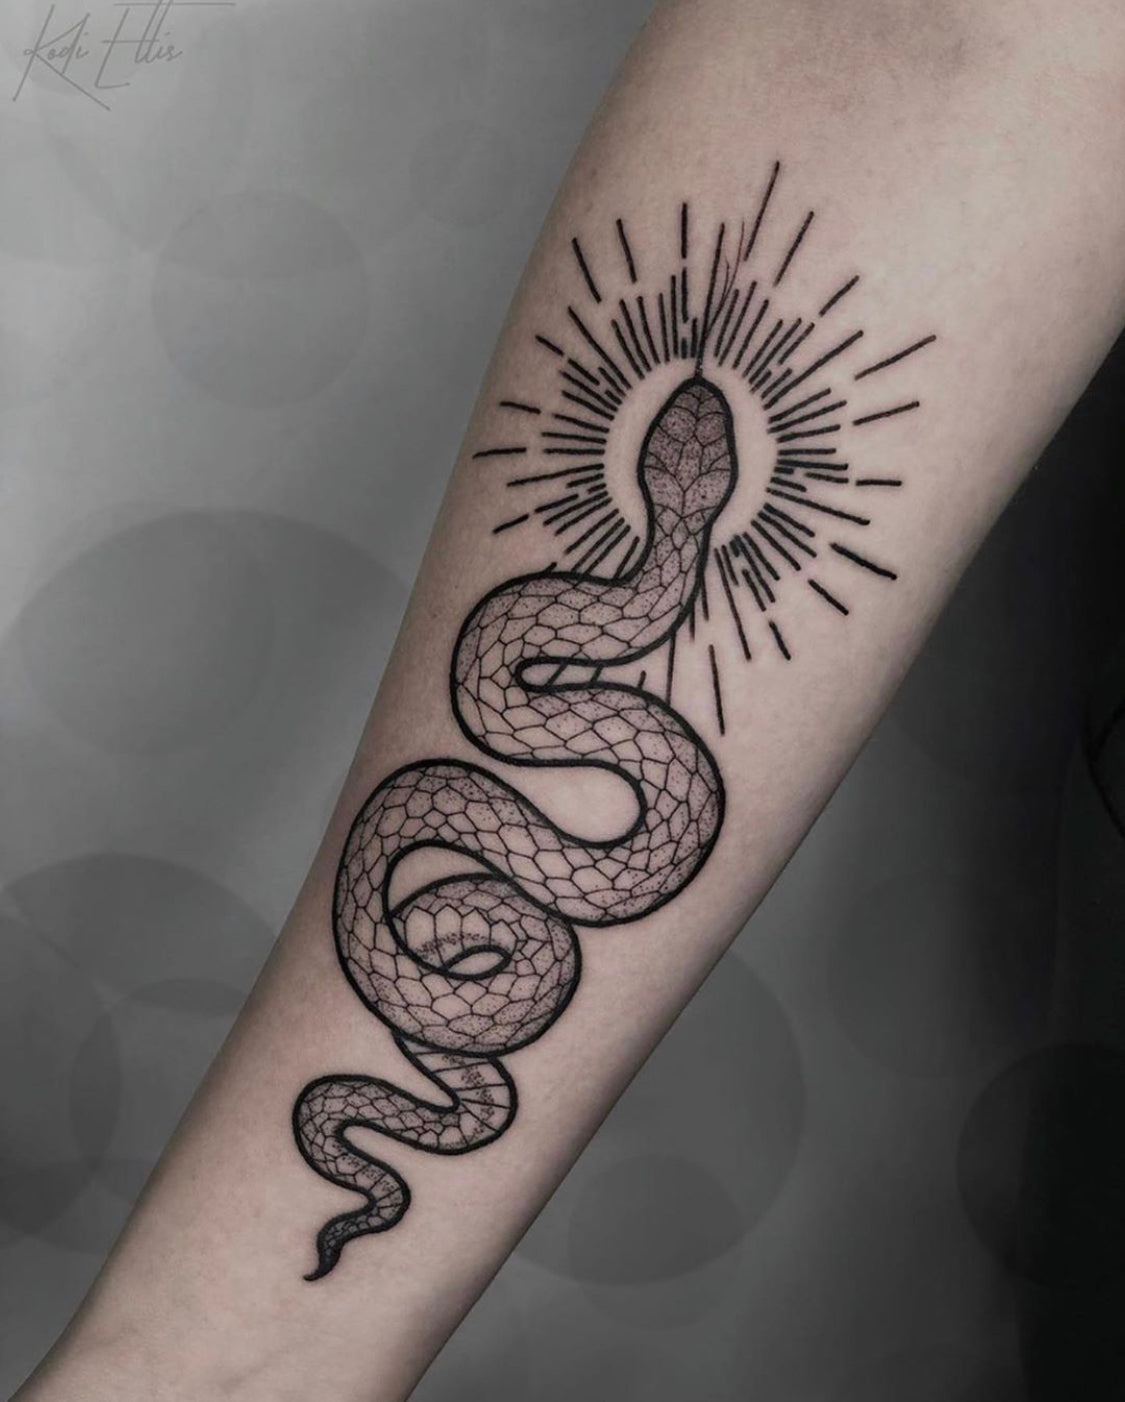 Artist Takes Line Art To Next Level By Making Single Continuous Line Tattoos   DeMilked